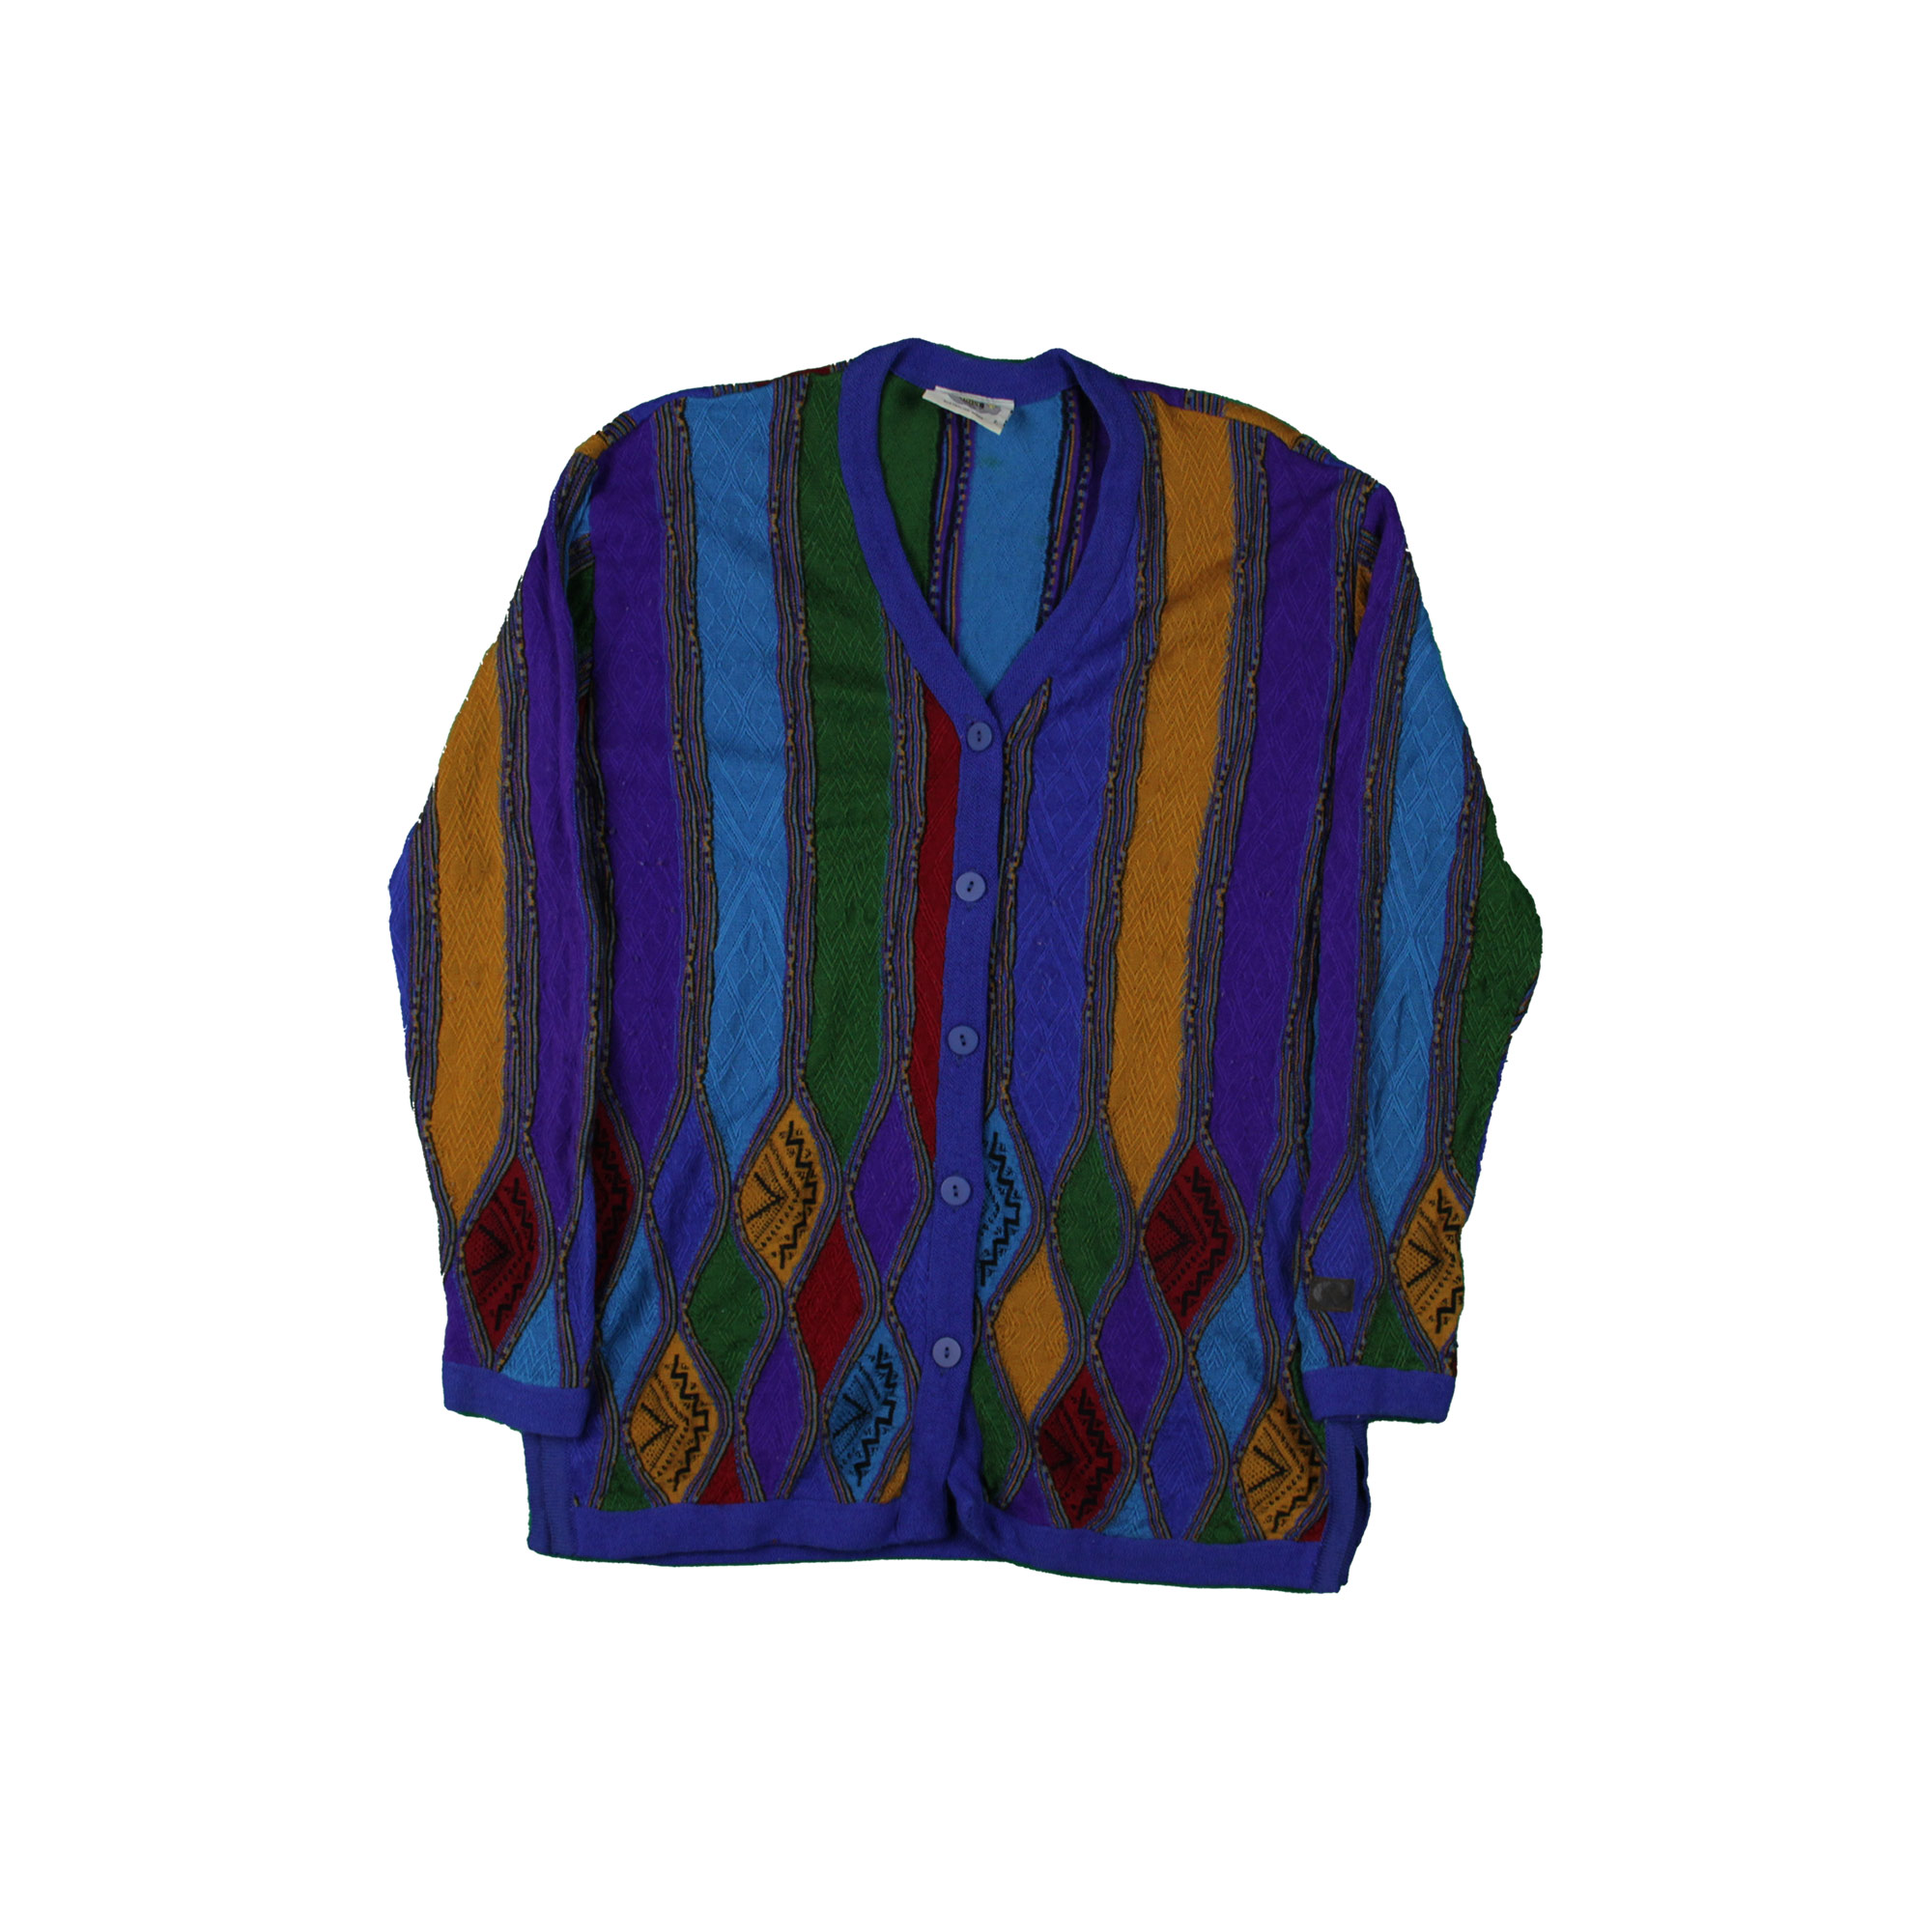 Coogi-Style Colourful Knitwear  - M